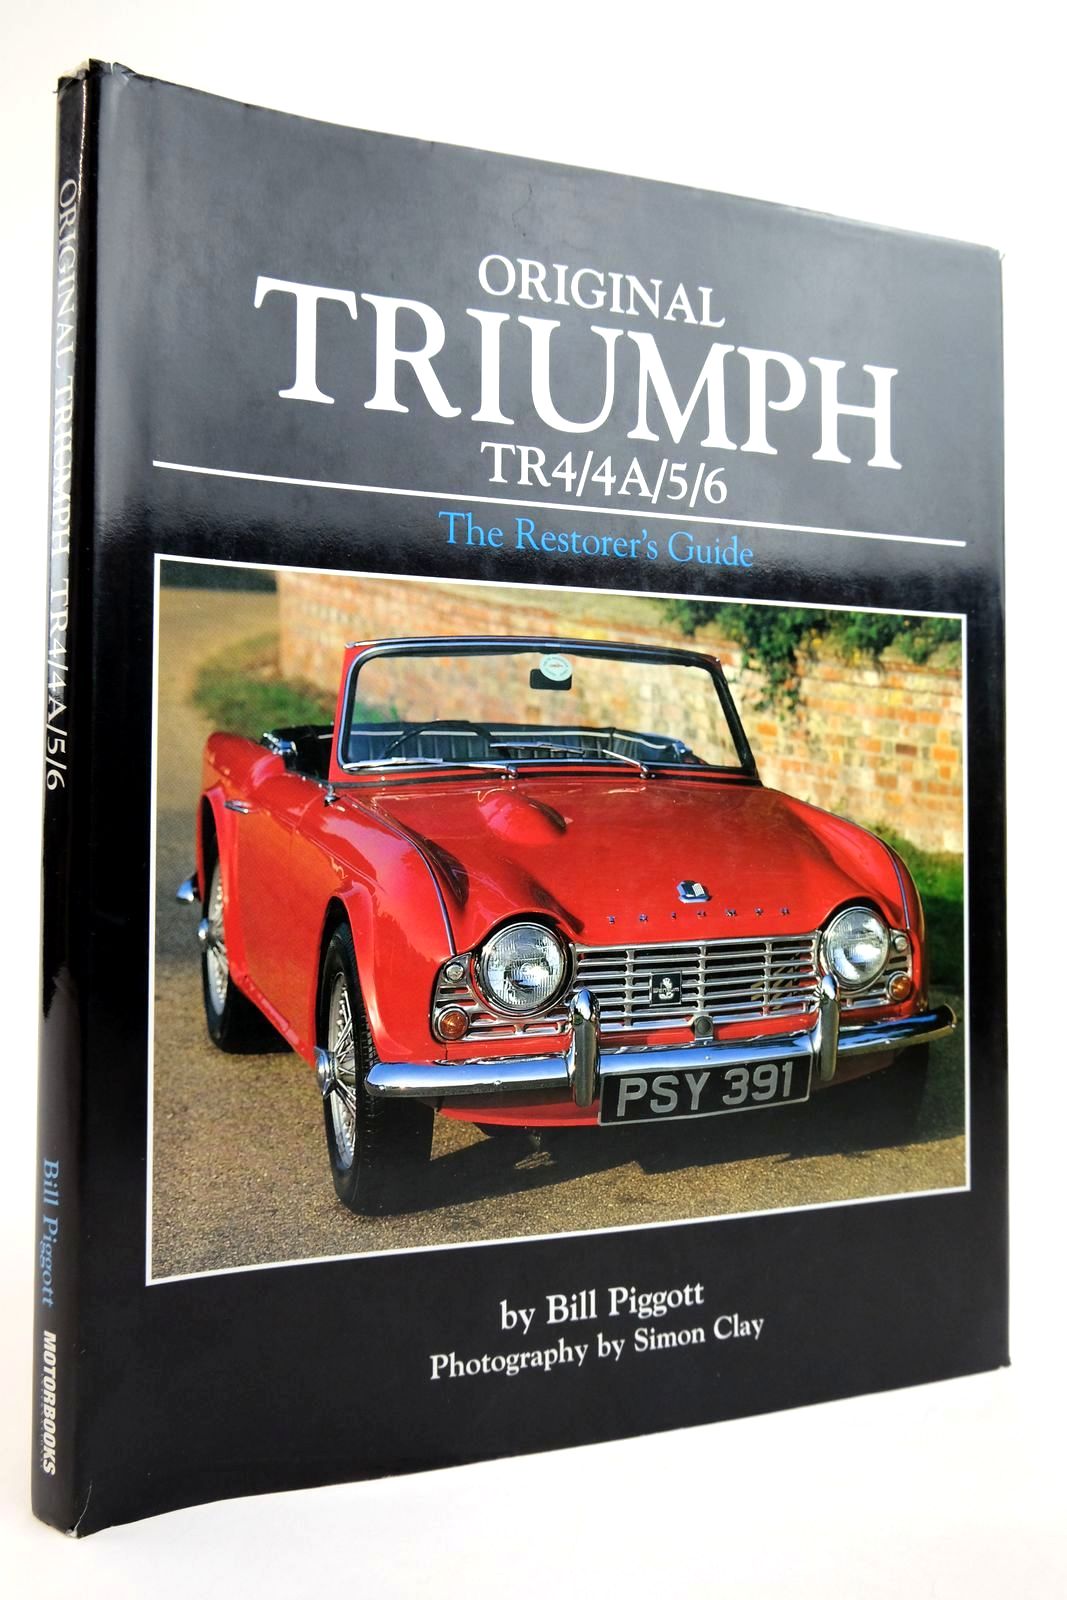 Photo of ORIGINAL TRIUMPH TR4/4A/5/6 written by Piggott, Bill published by Motorbooks International (STOCK CODE: 2134997)  for sale by Stella & Rose's Books